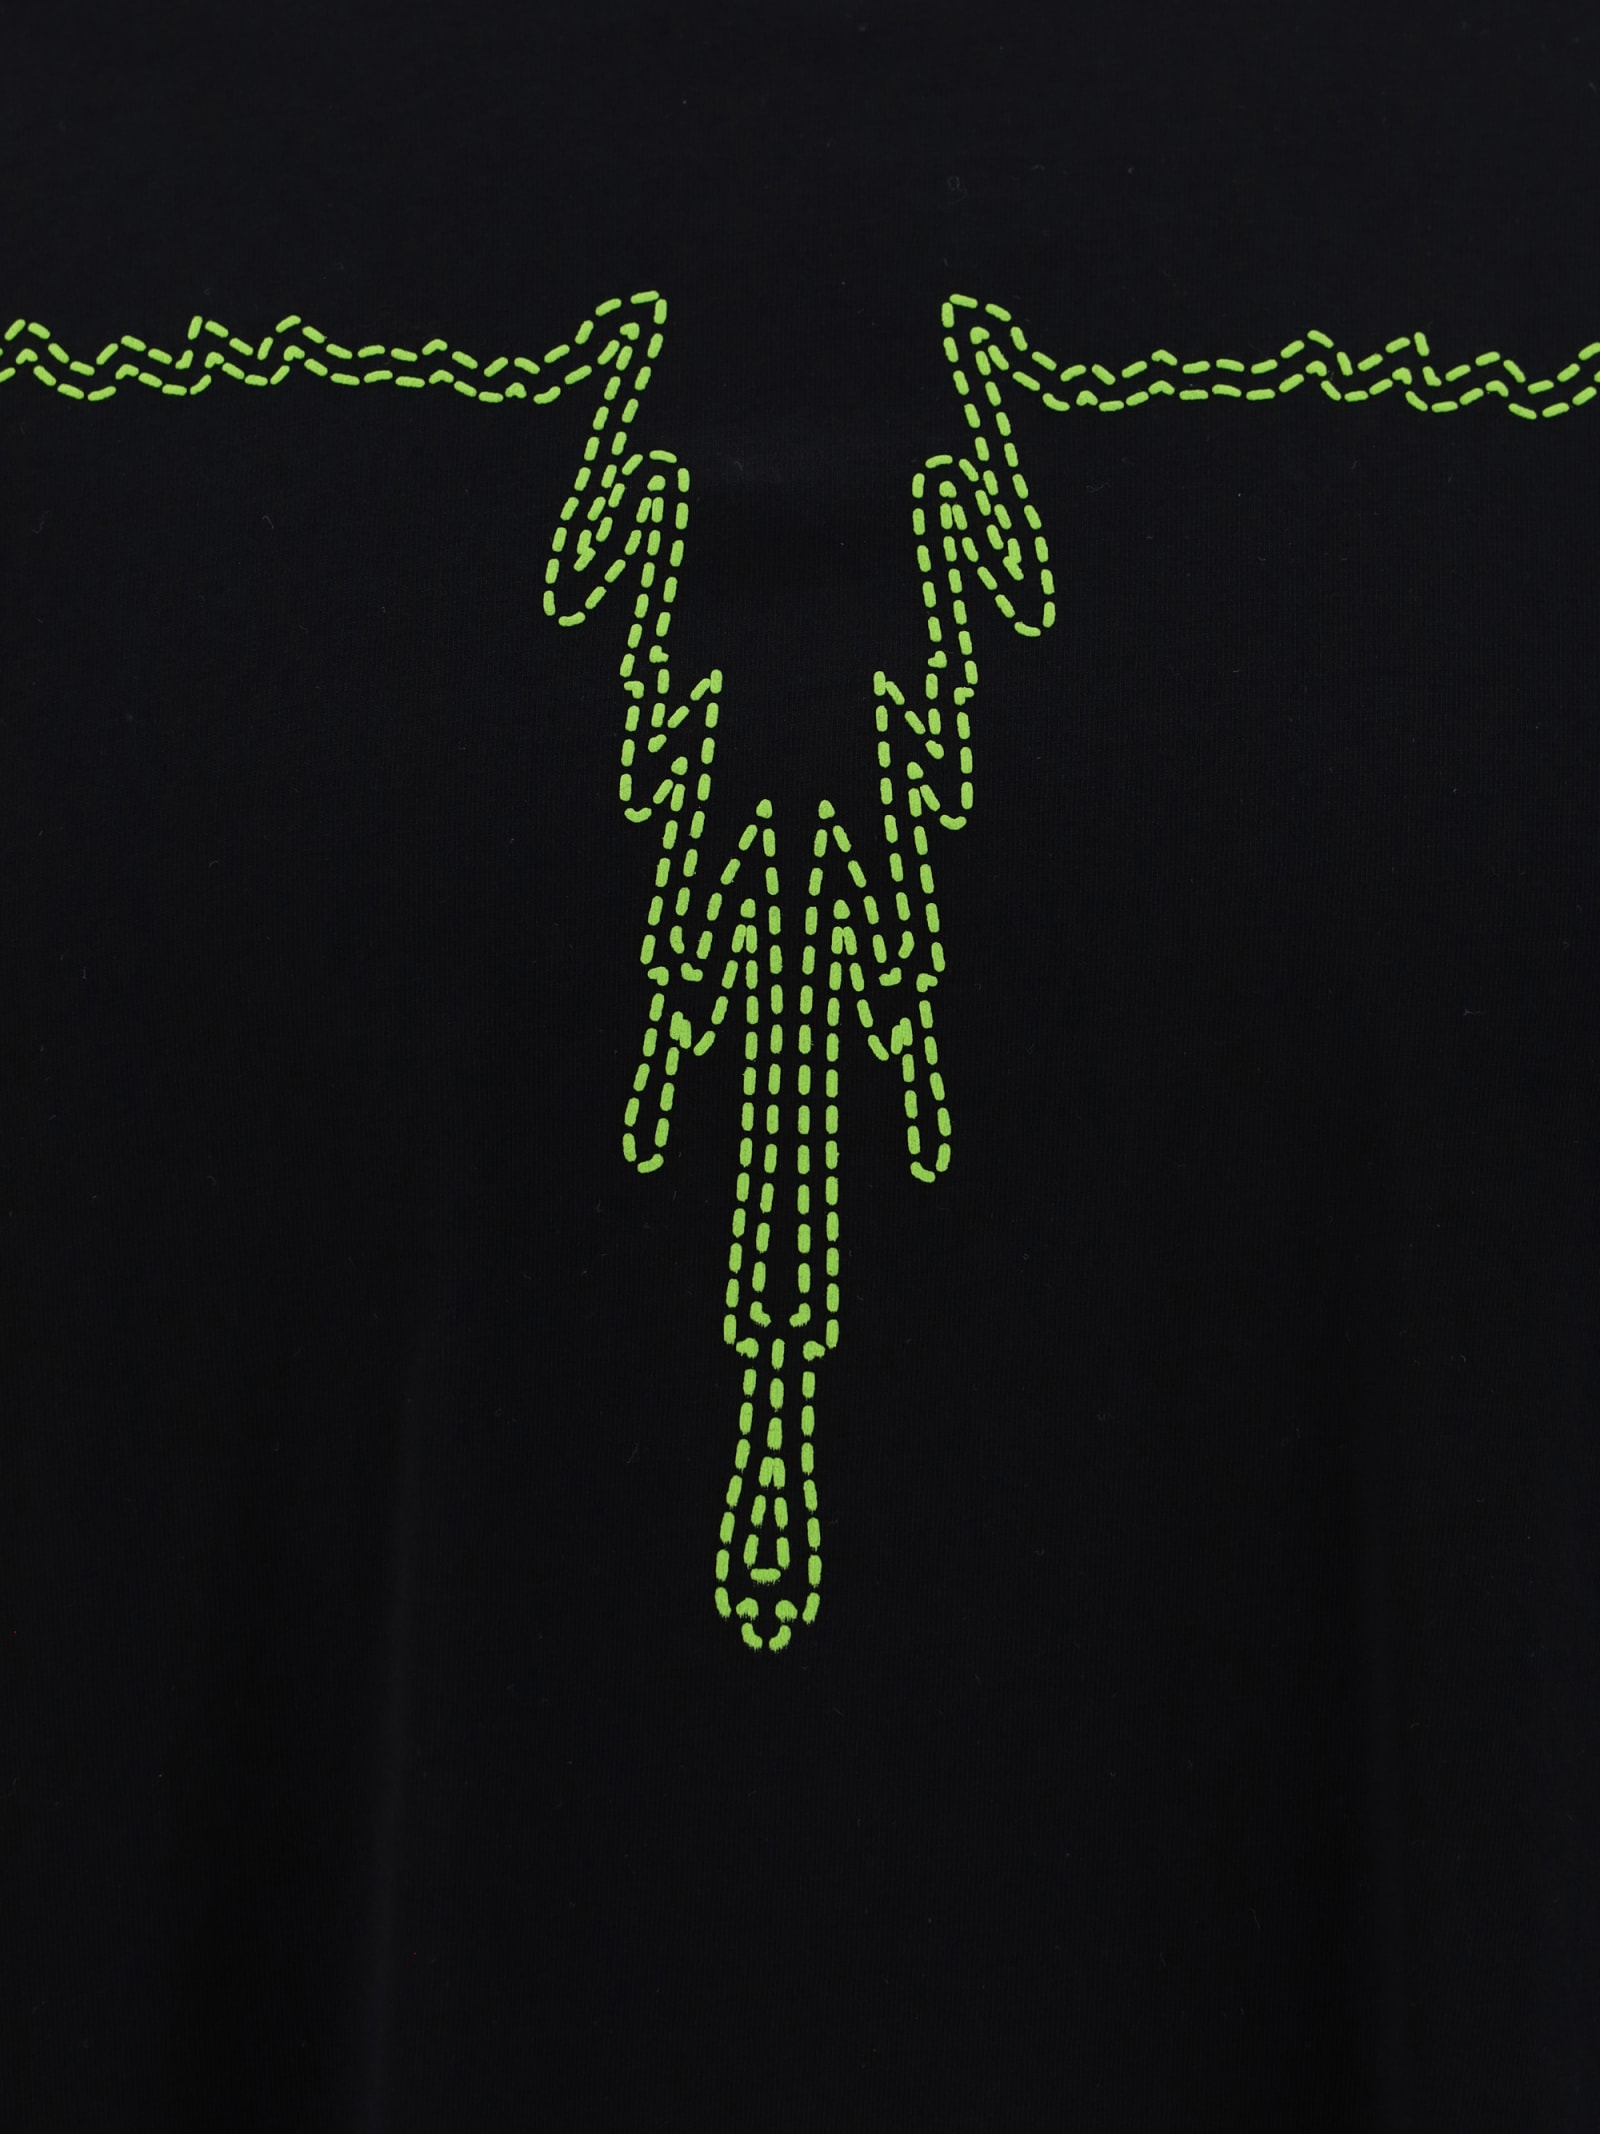 Shop Marcelo Burlon County Of Milan Stitch Wings T-shirt In Black Lime